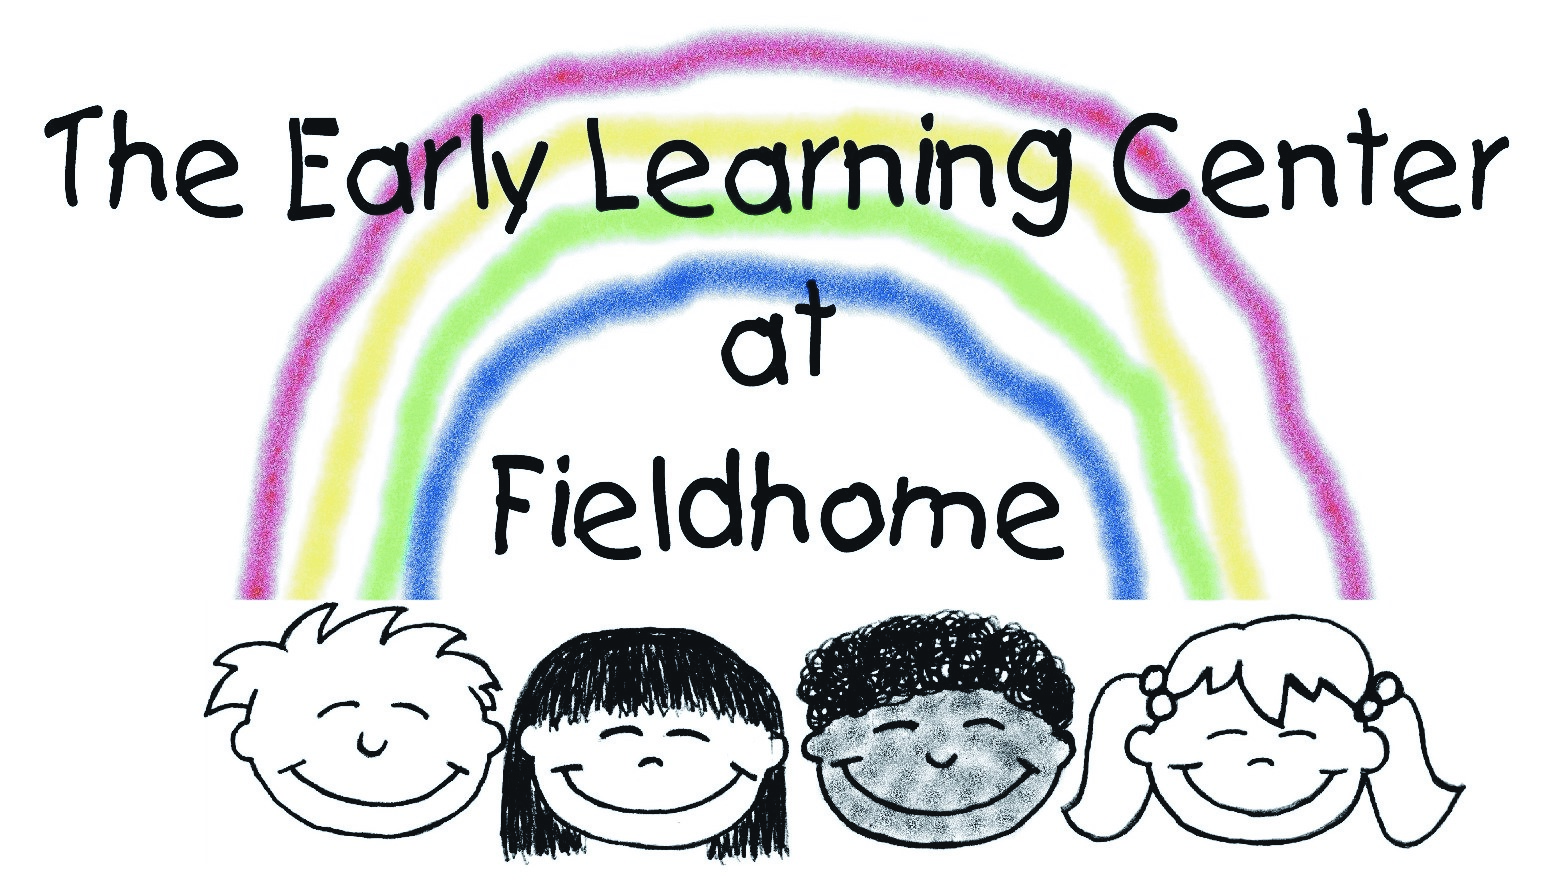 The Early Learning Center at Fieldhome